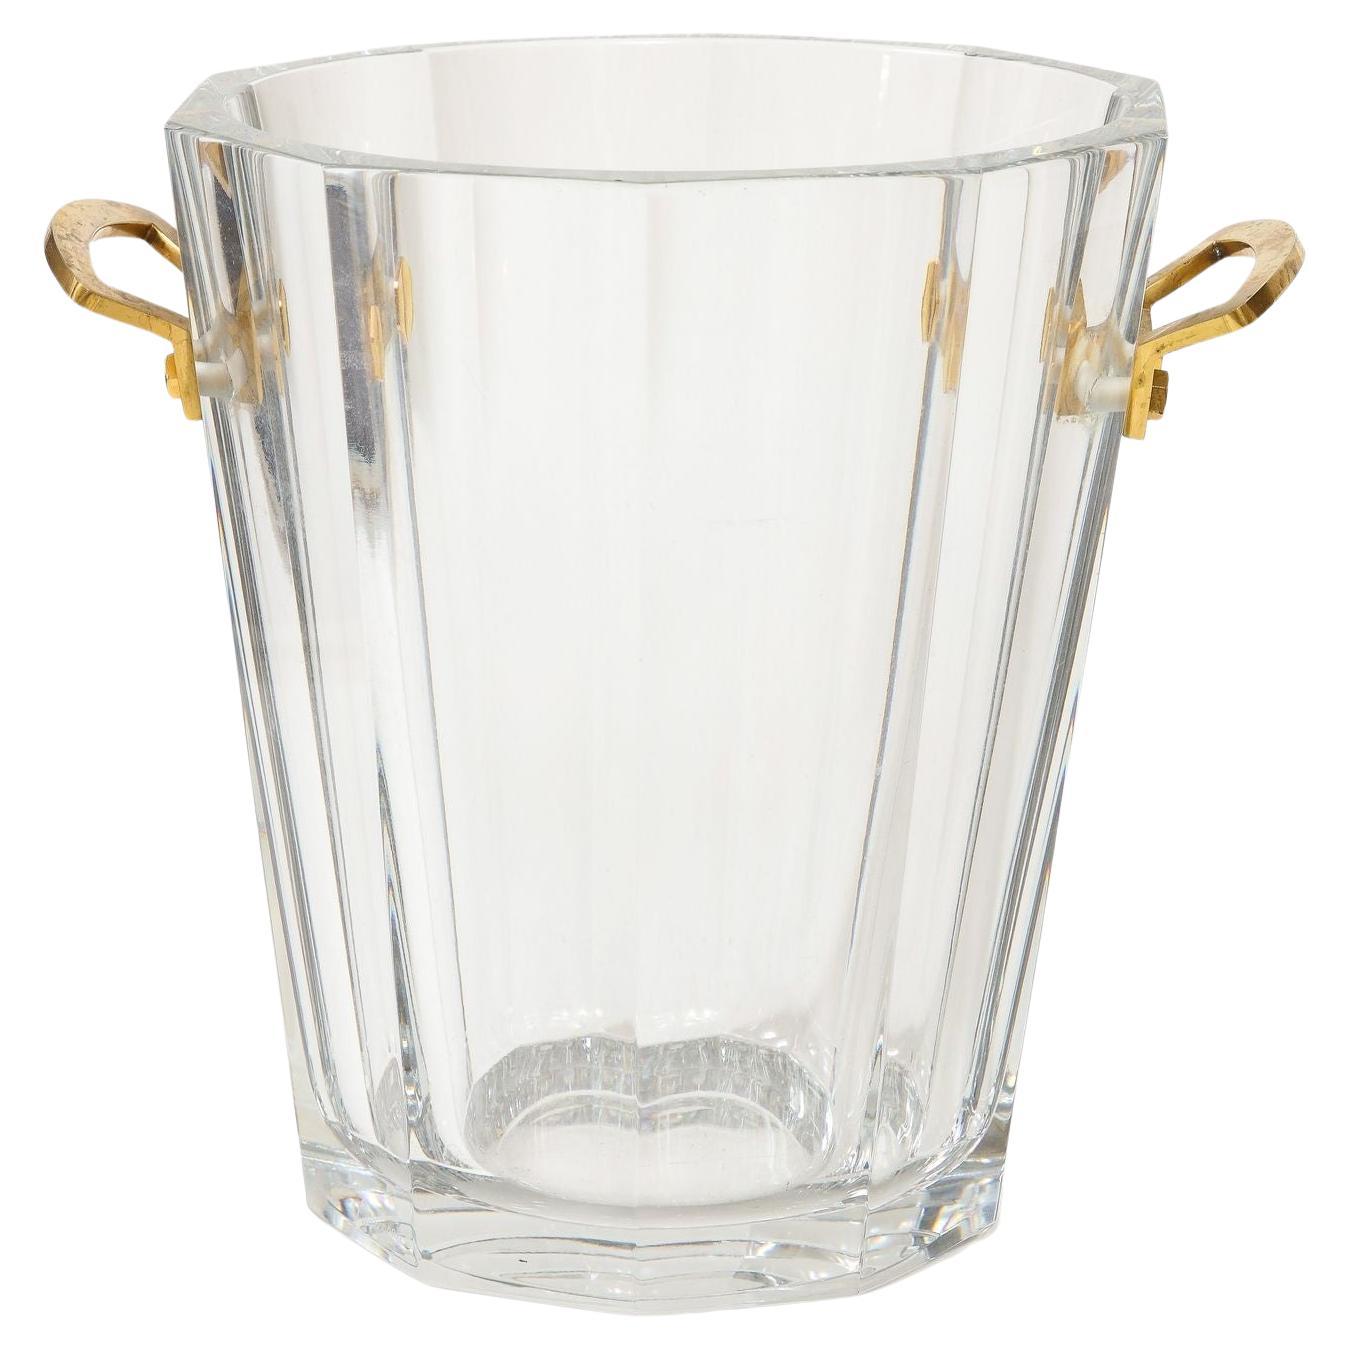 Baccarat Fluted Crystal Ice Bucket with Gold plated Handles.